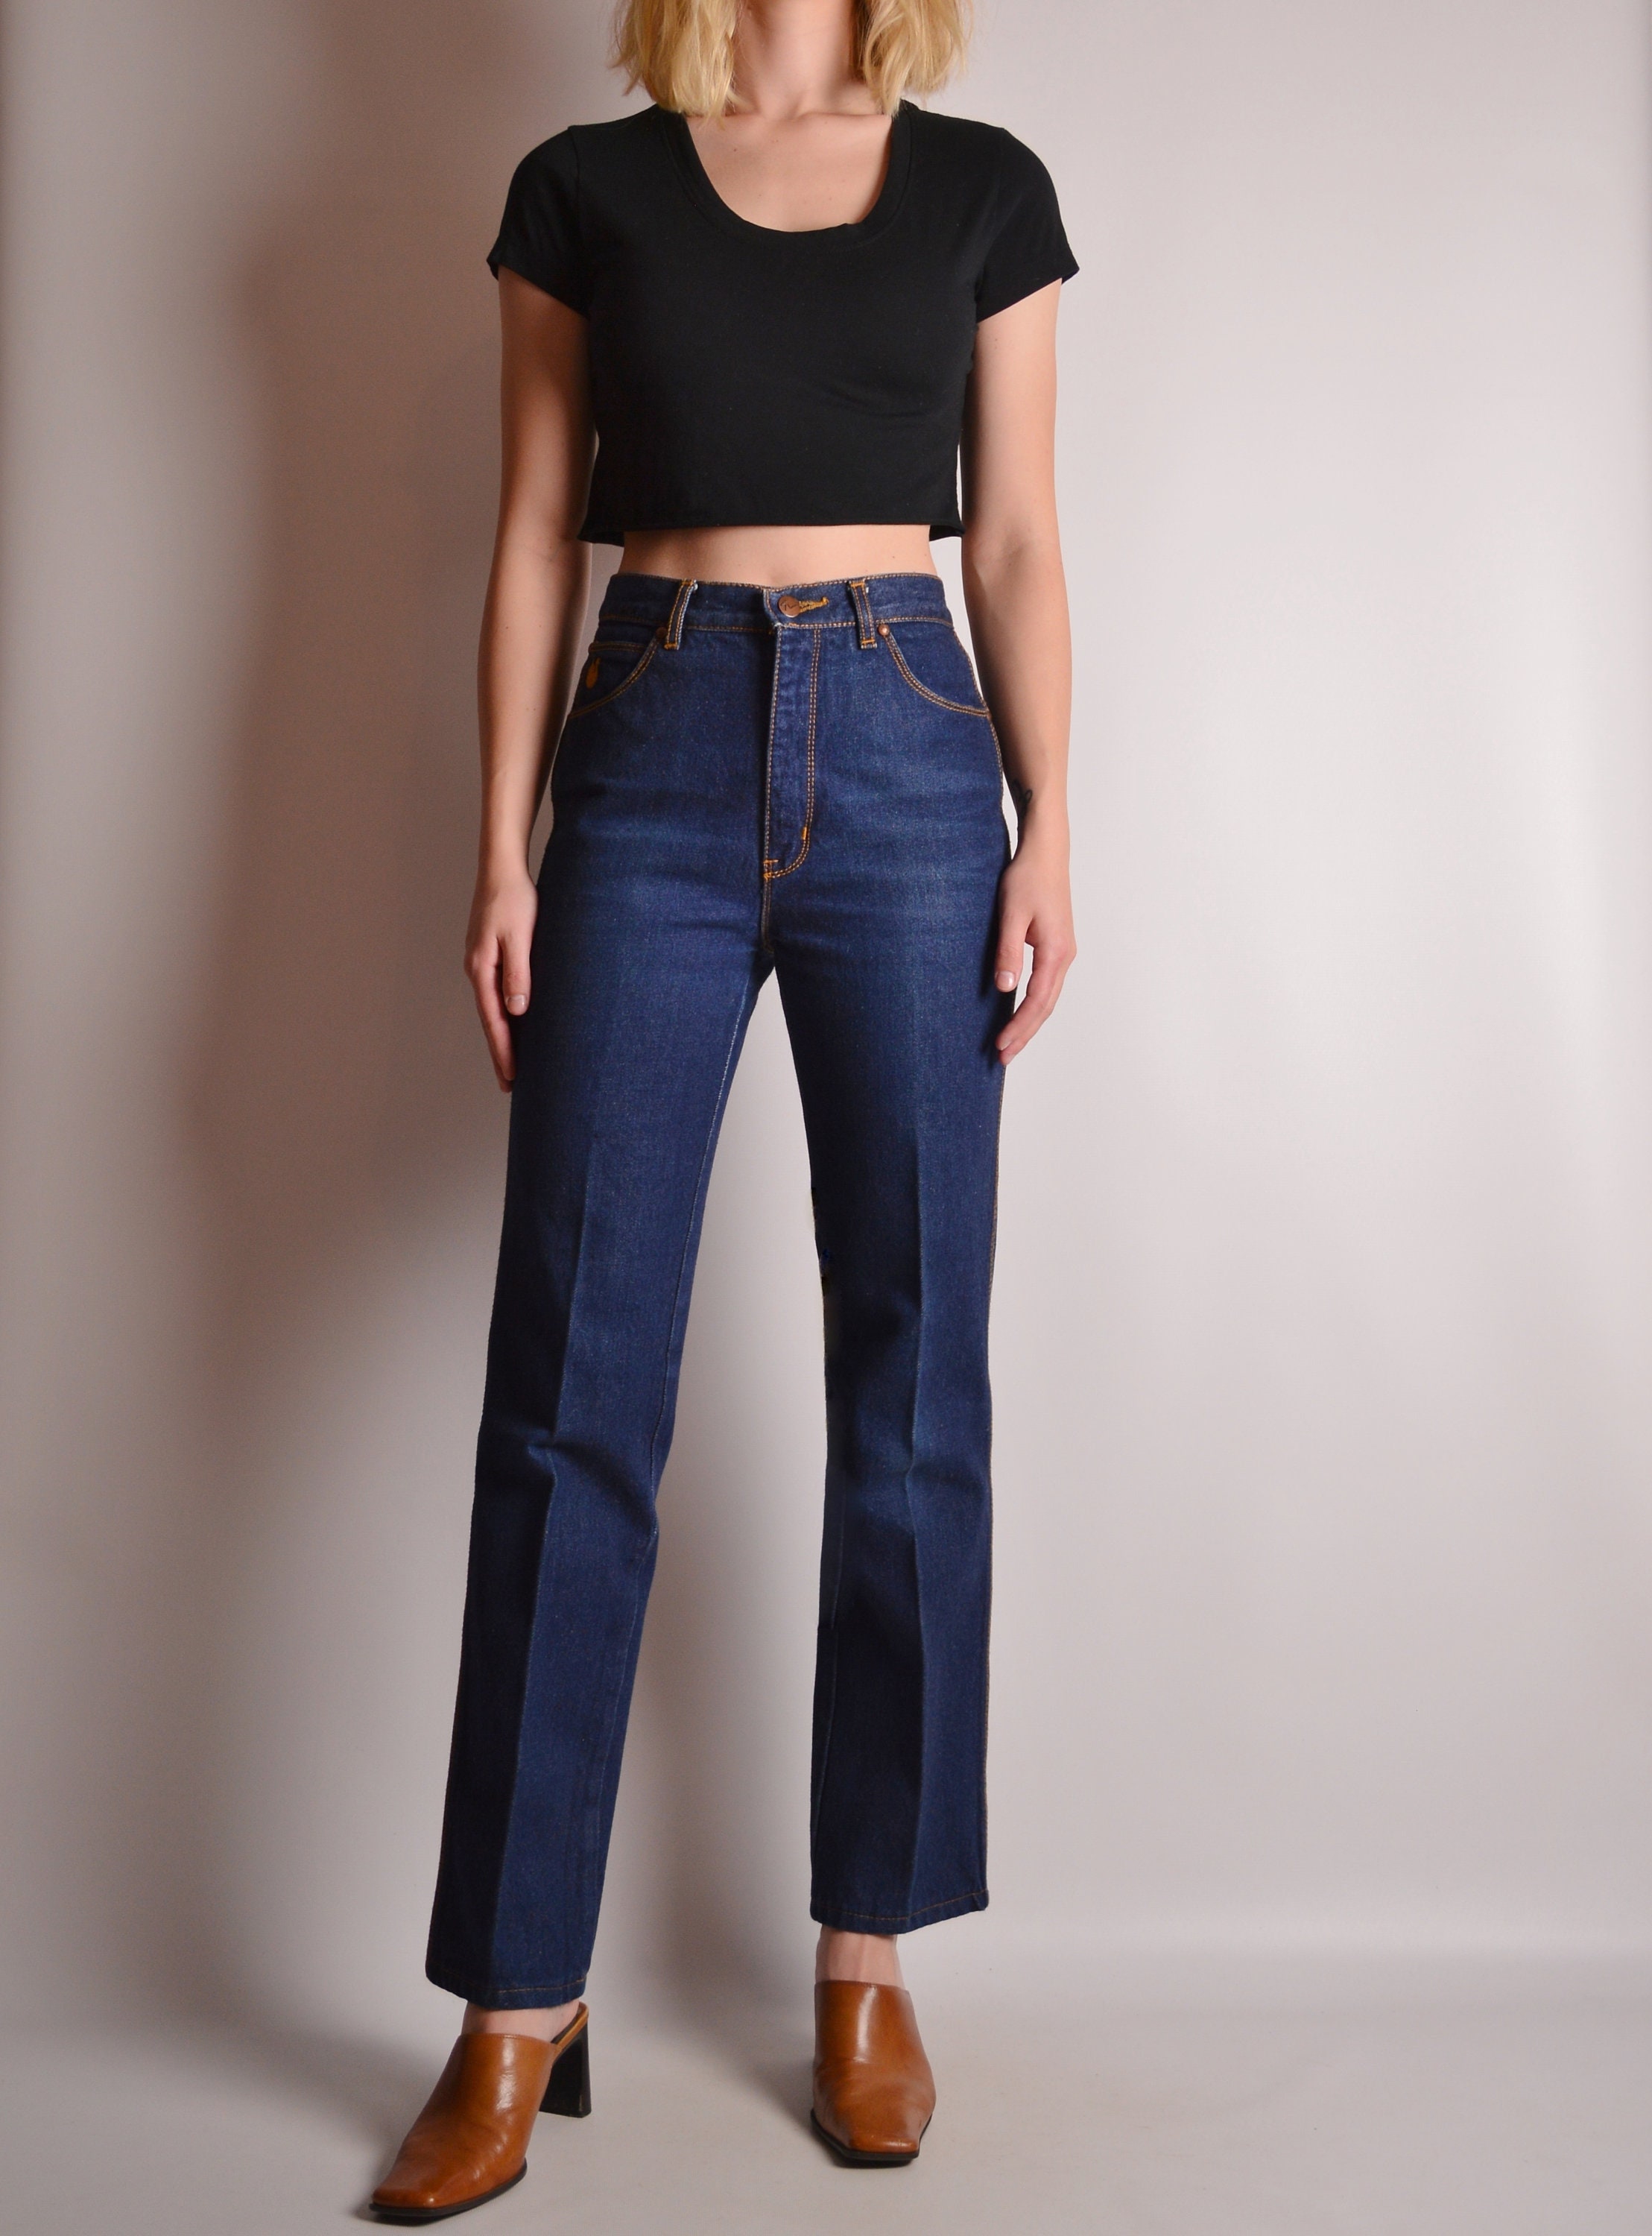 Vintage 70's Flare Jeans (XS)